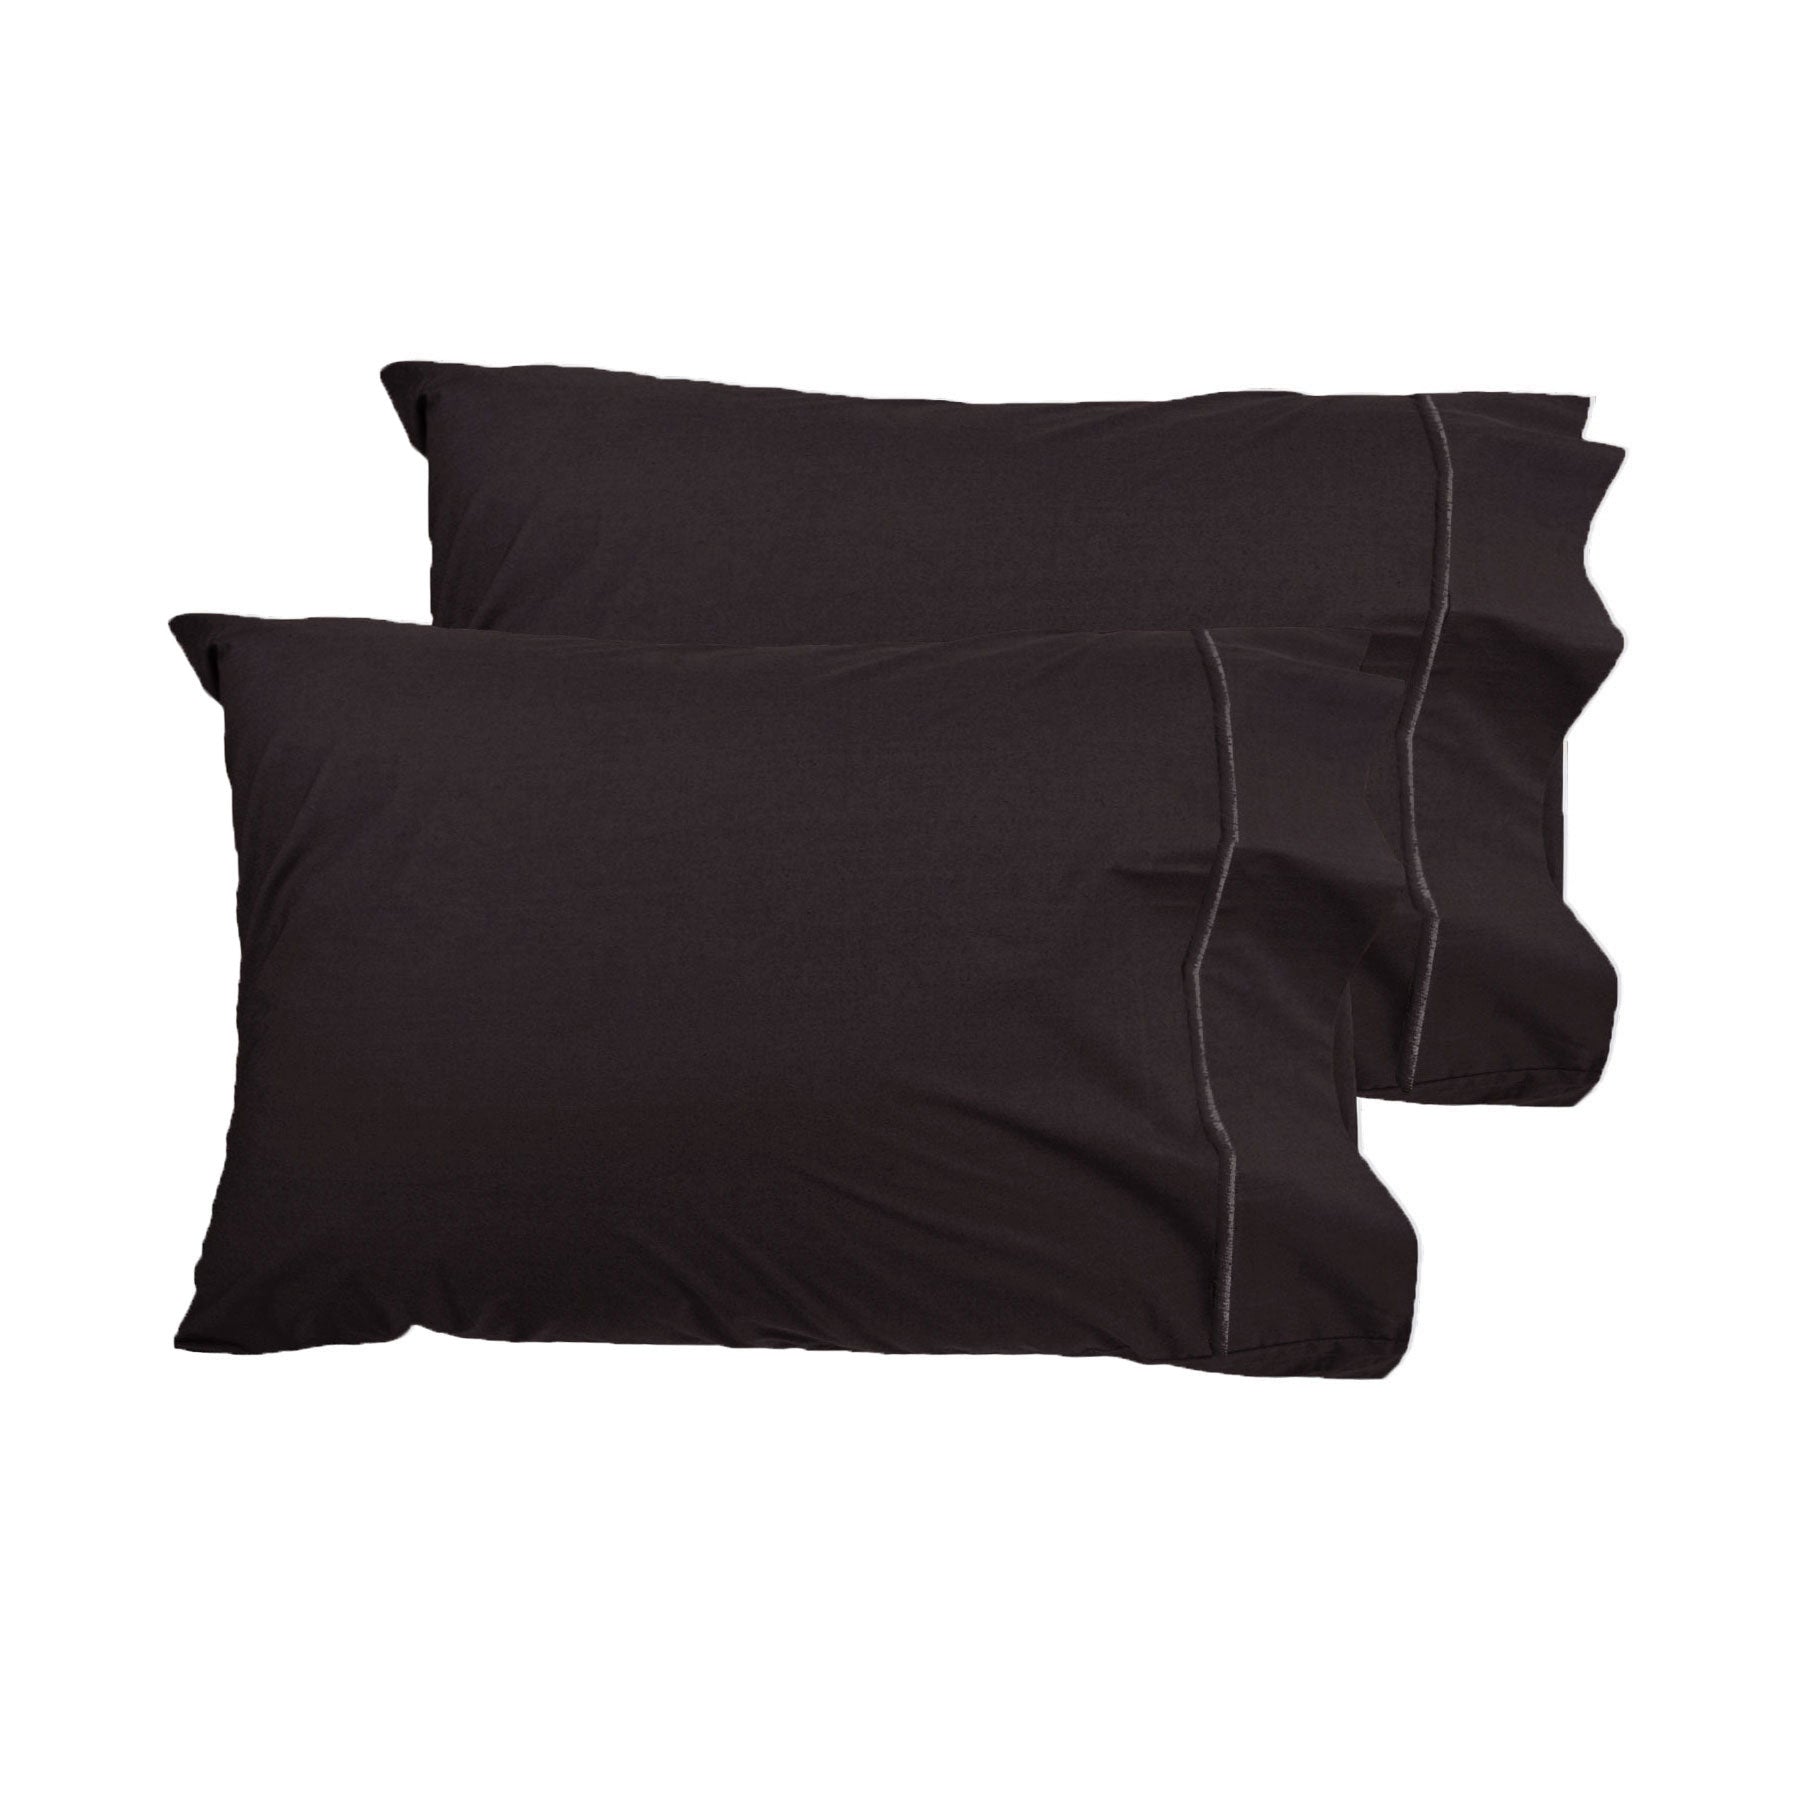 Pair of Queen Sized Pillowcases - Walnut